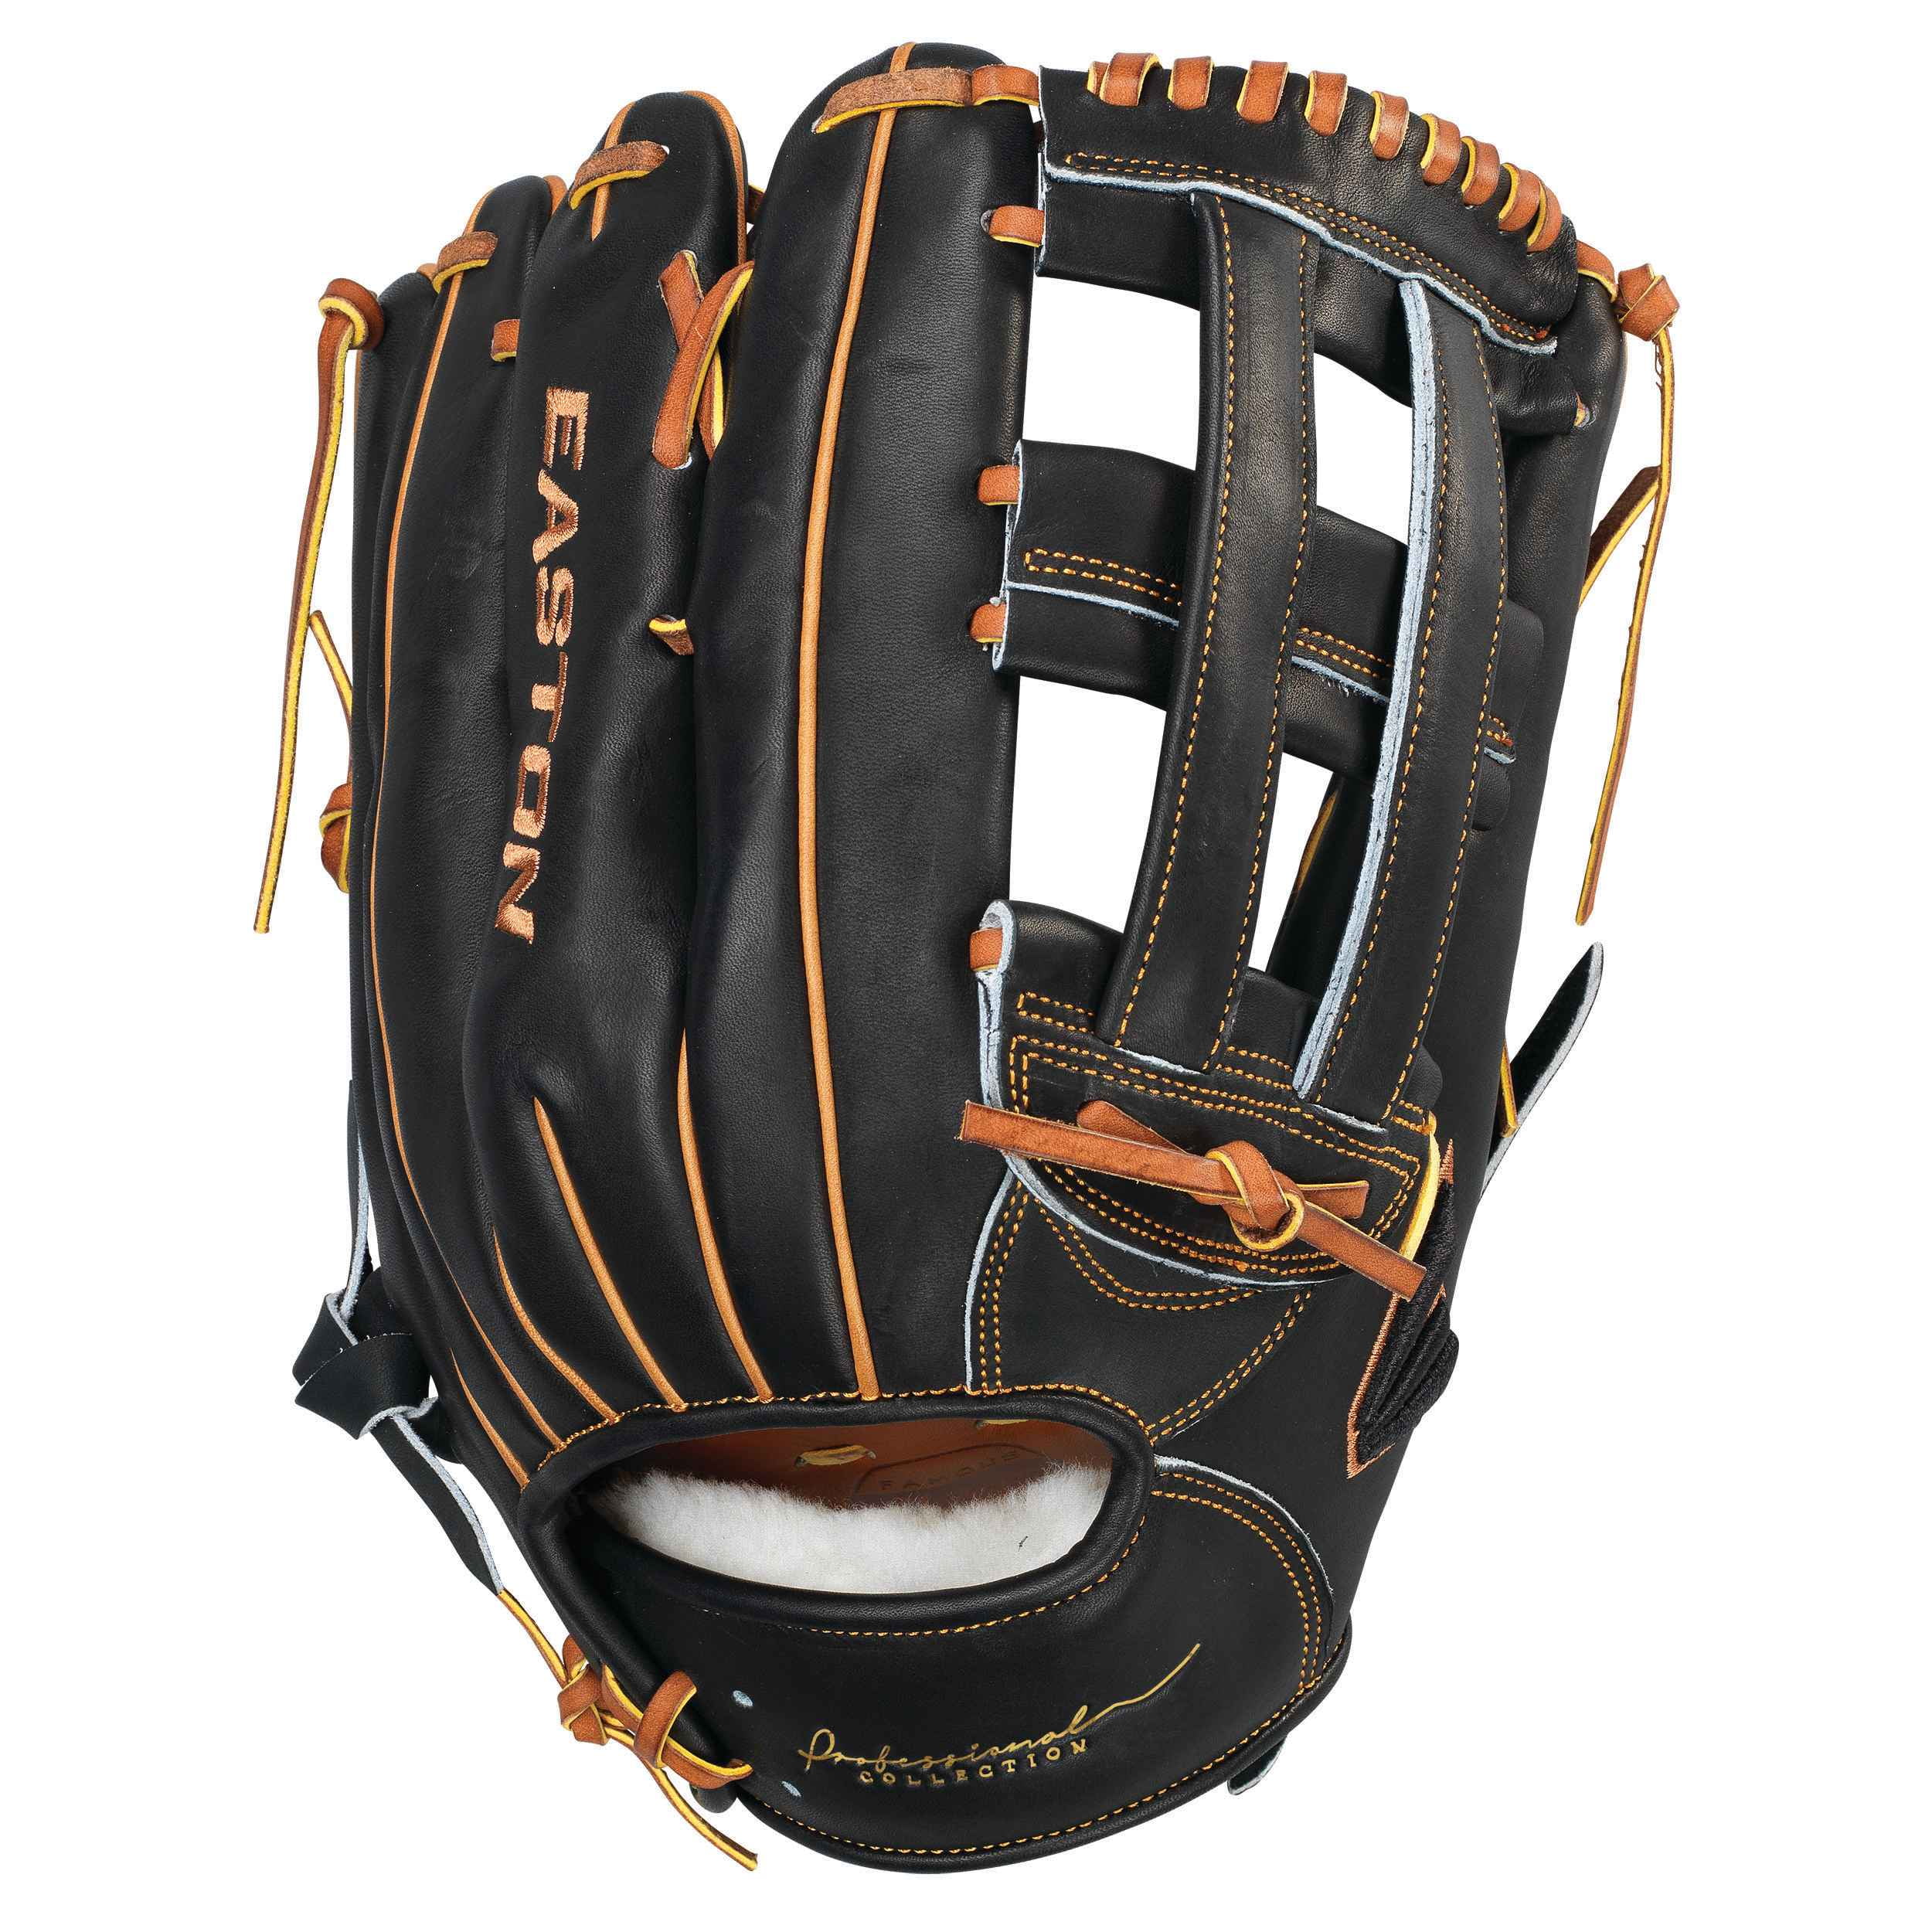 Easton Professional Collection Hybrid 12.75-inch Glove